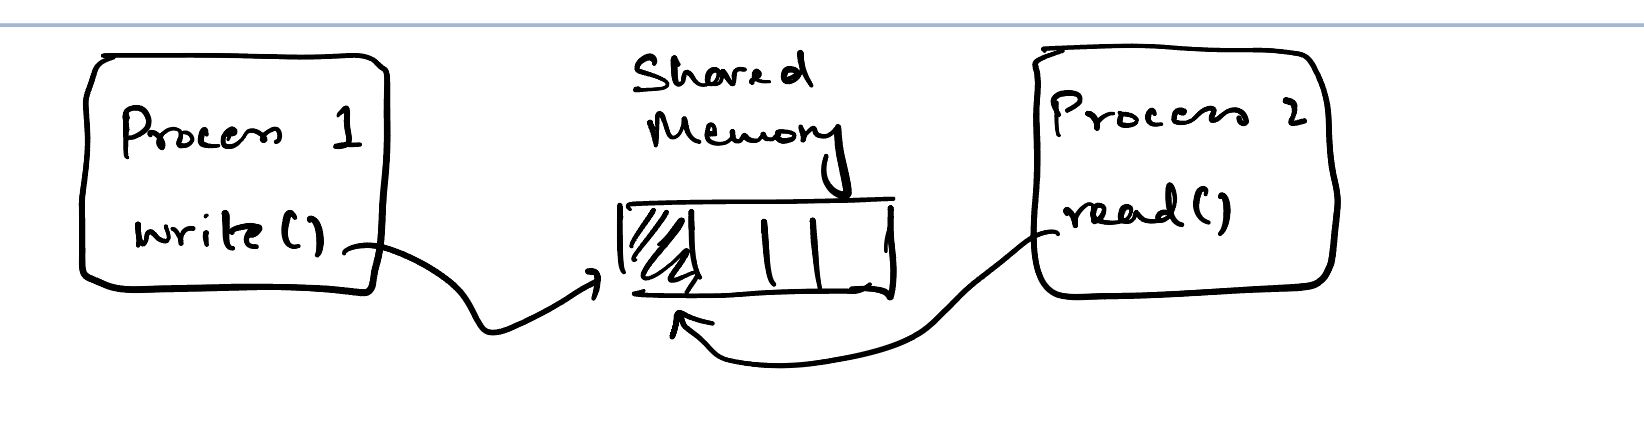 processes-shared-memory